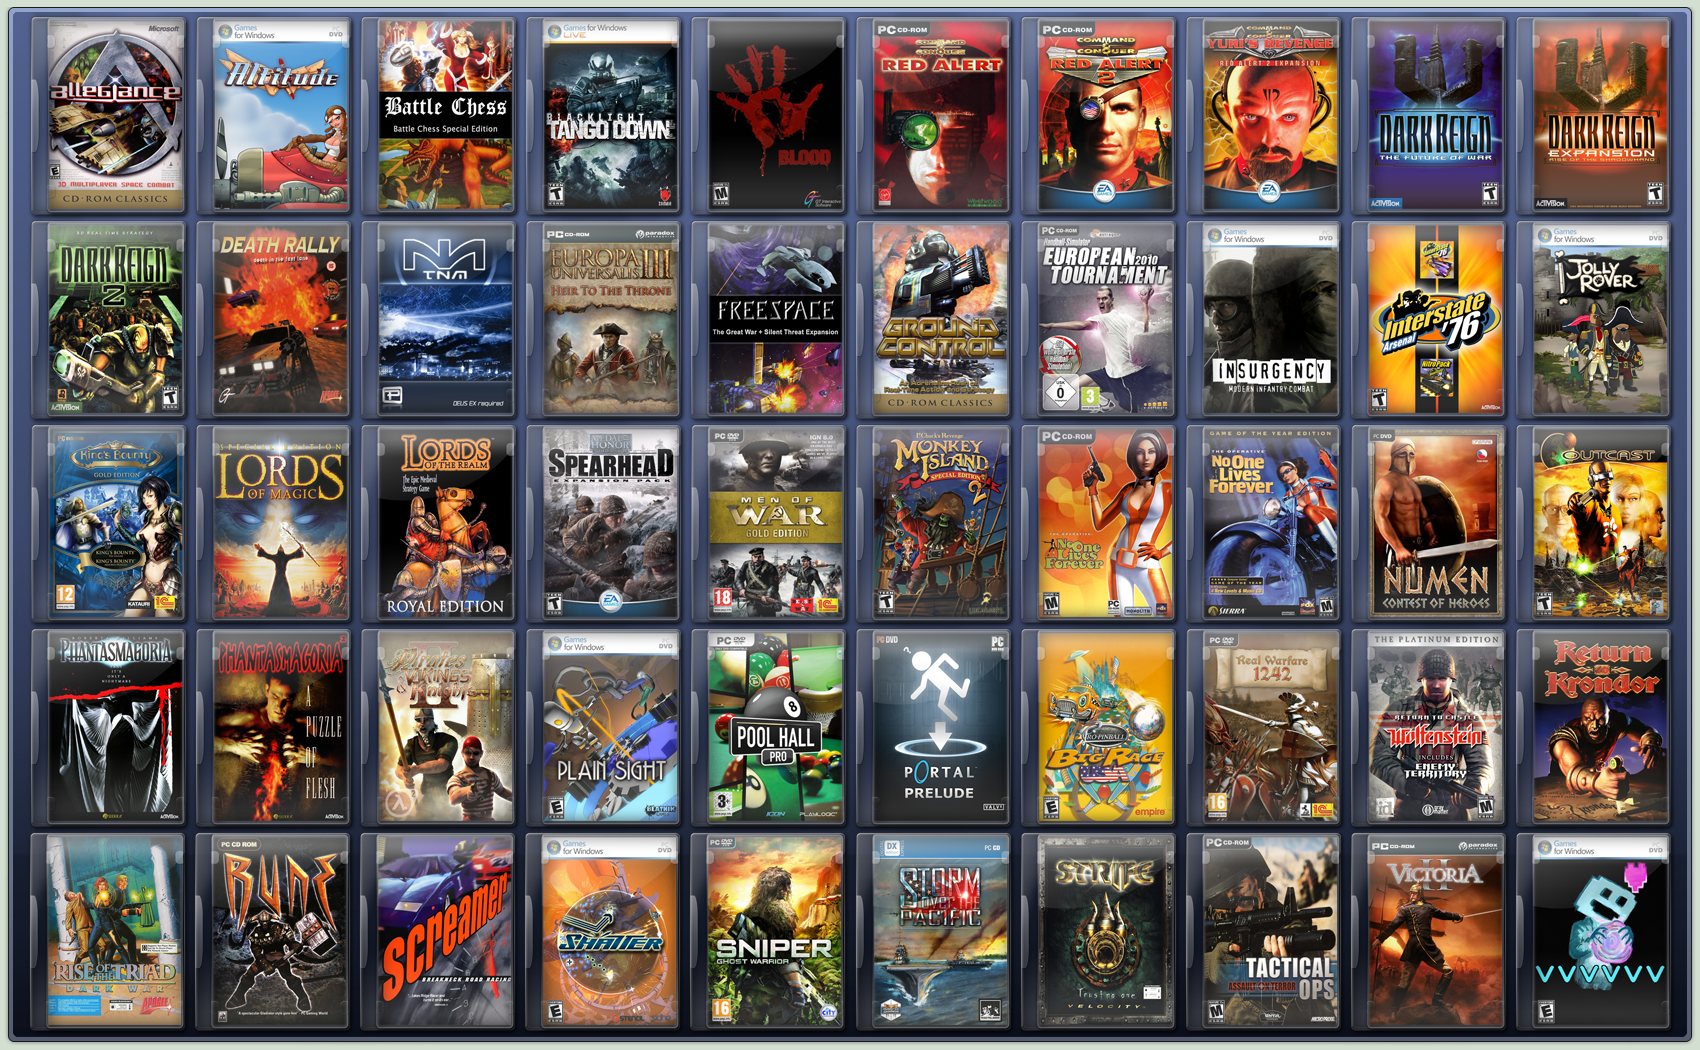 14 Game Icons DeviantART Images  PC Game Icons, PC Game Icons and Game Icons 